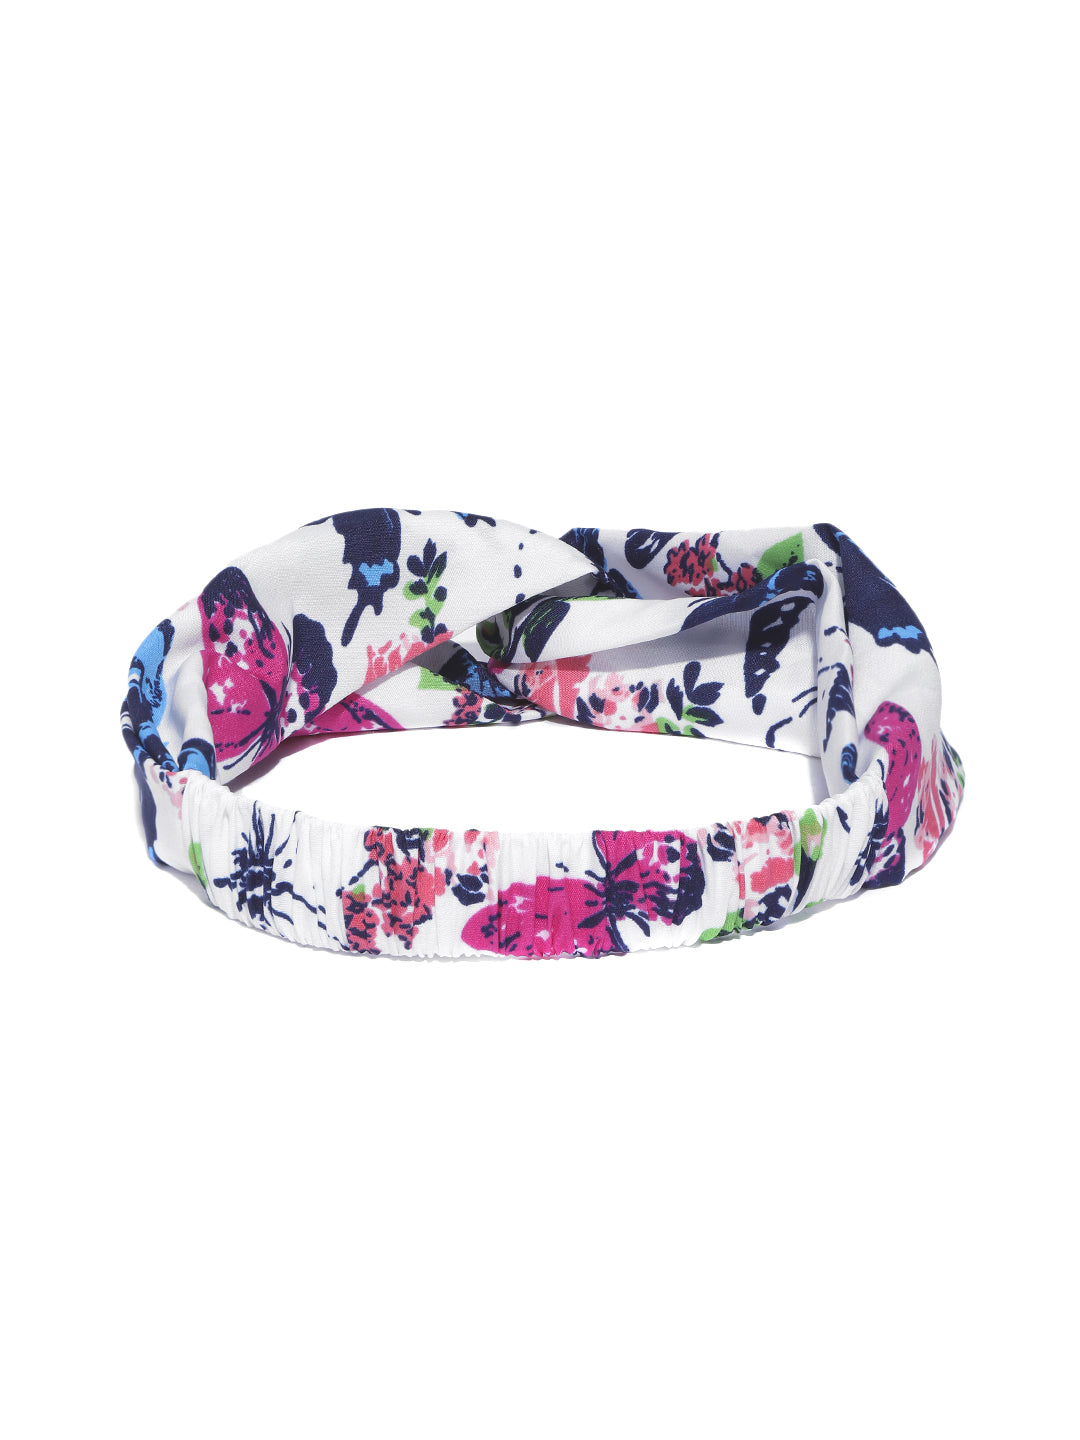 Blueberry multi floral printed white knot hairband